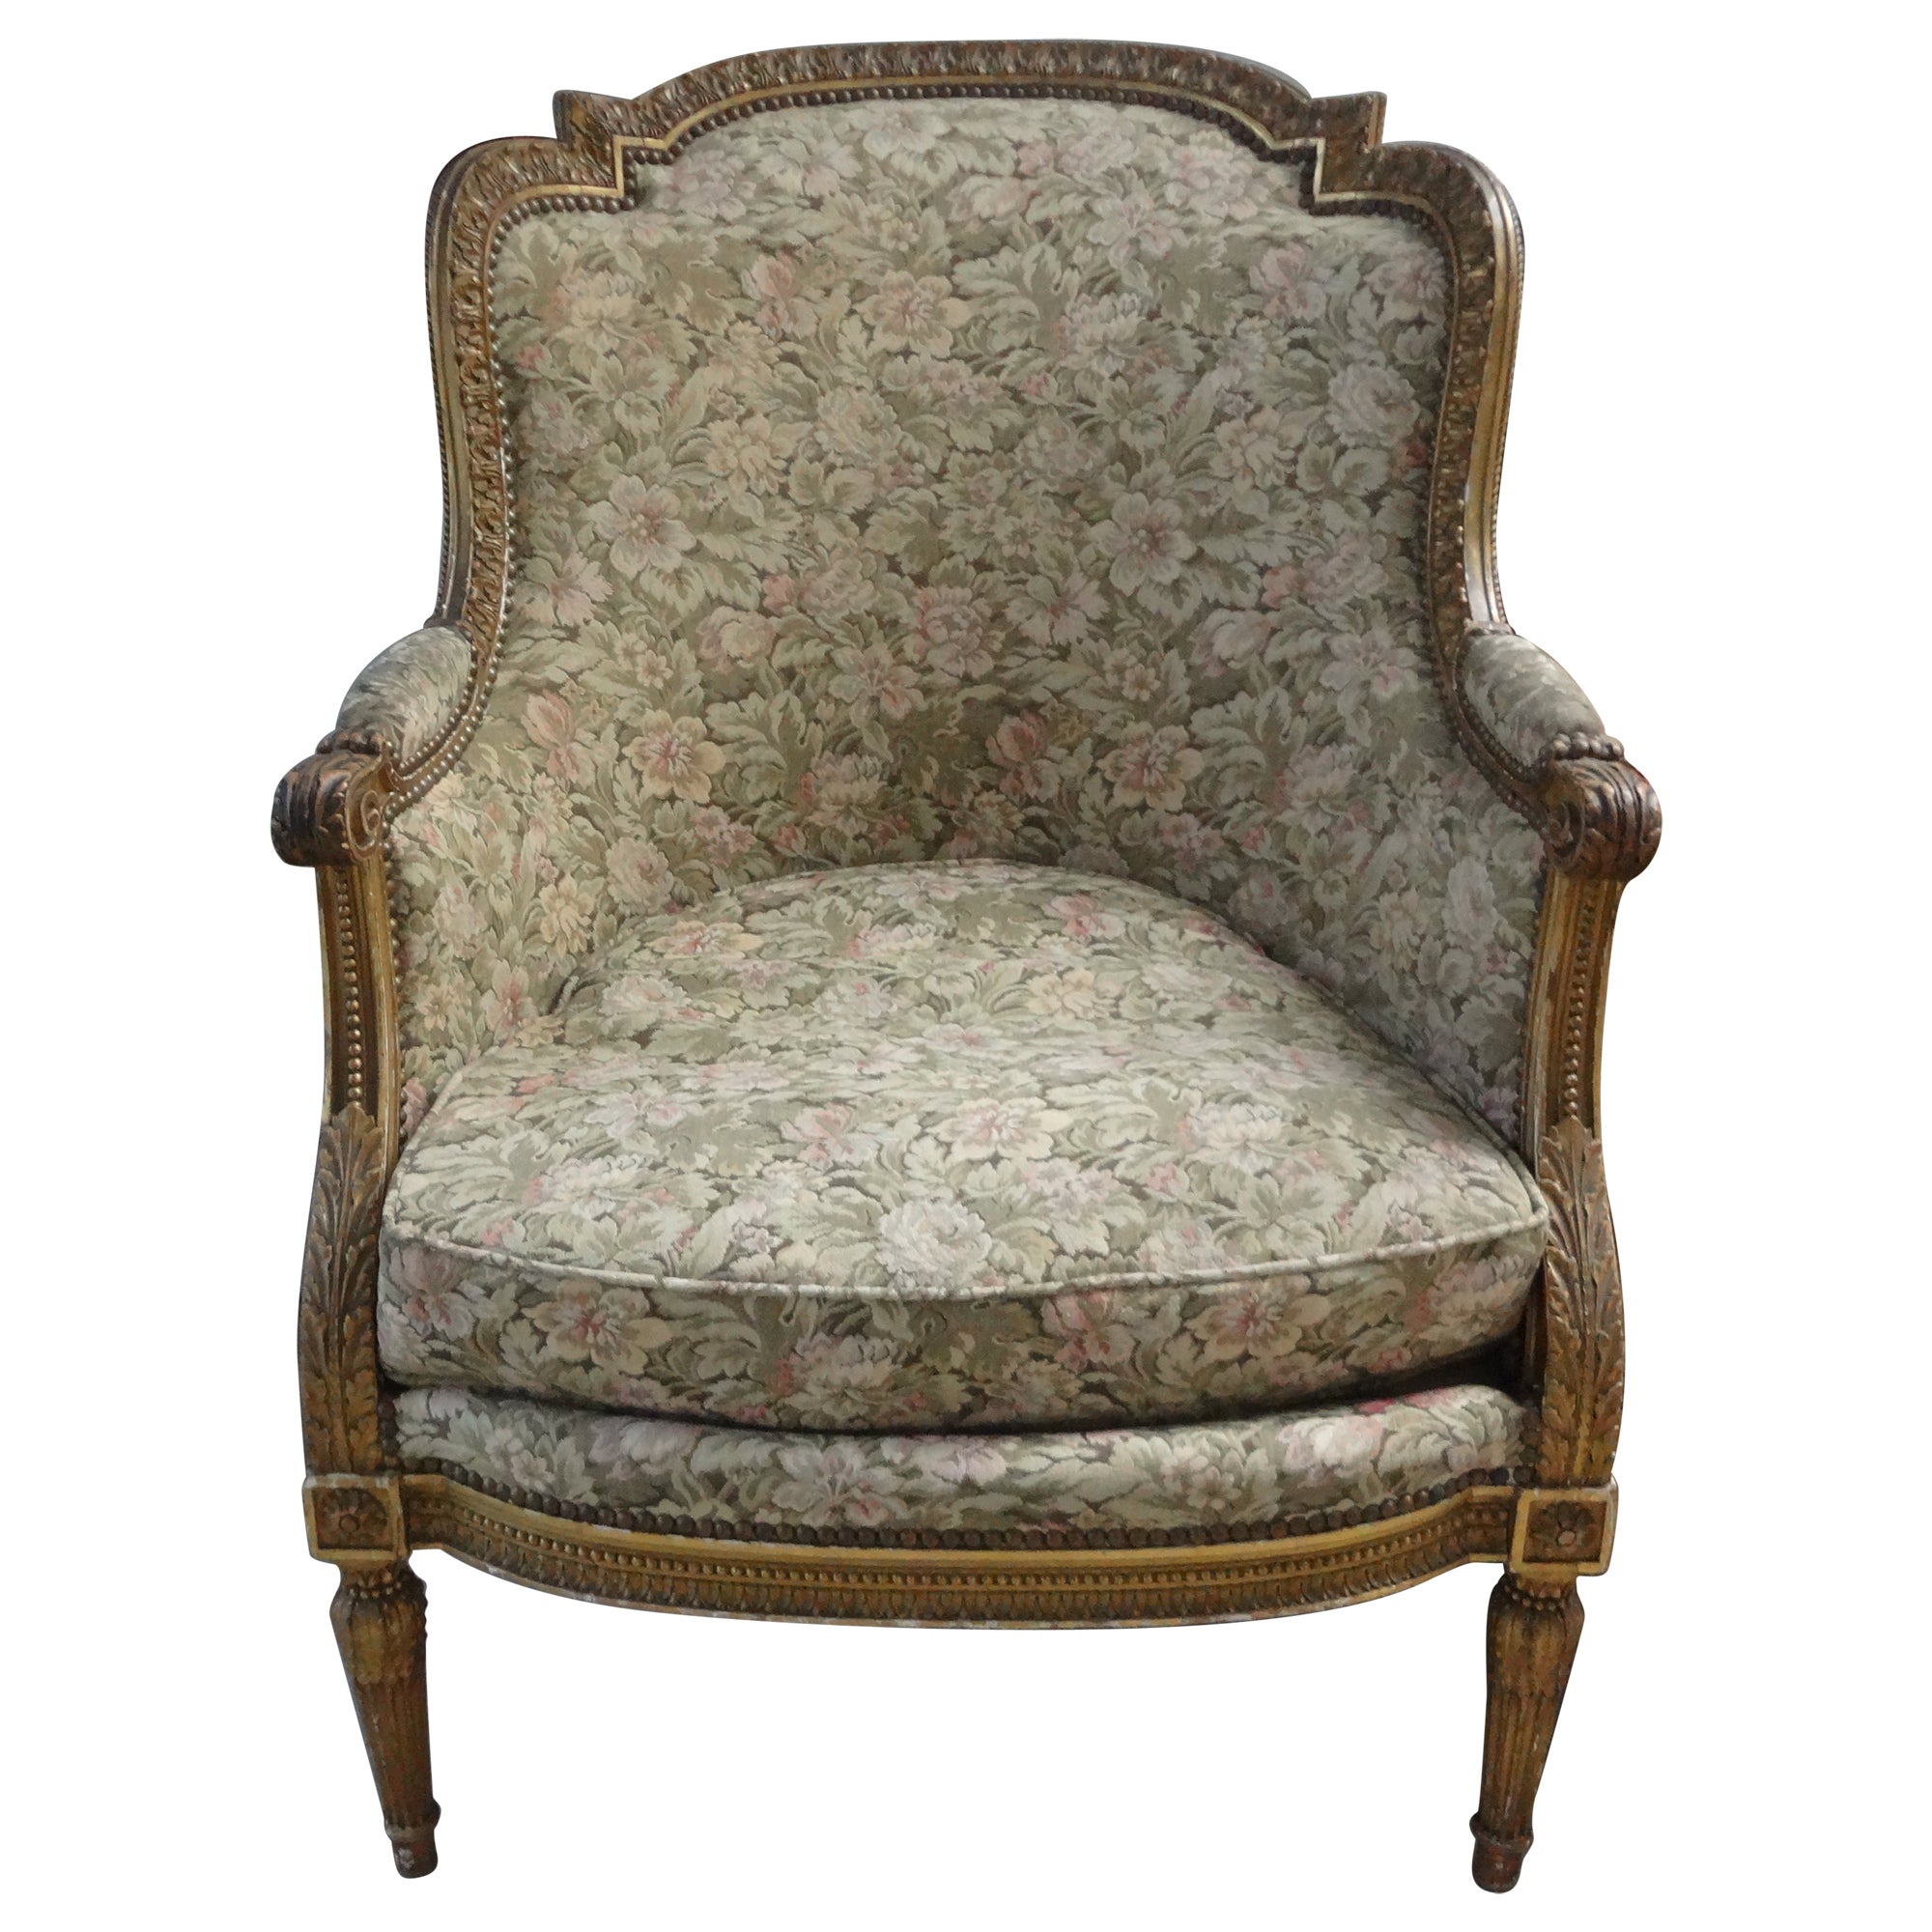 19th Century French Louis XVI Giltwood Bergere